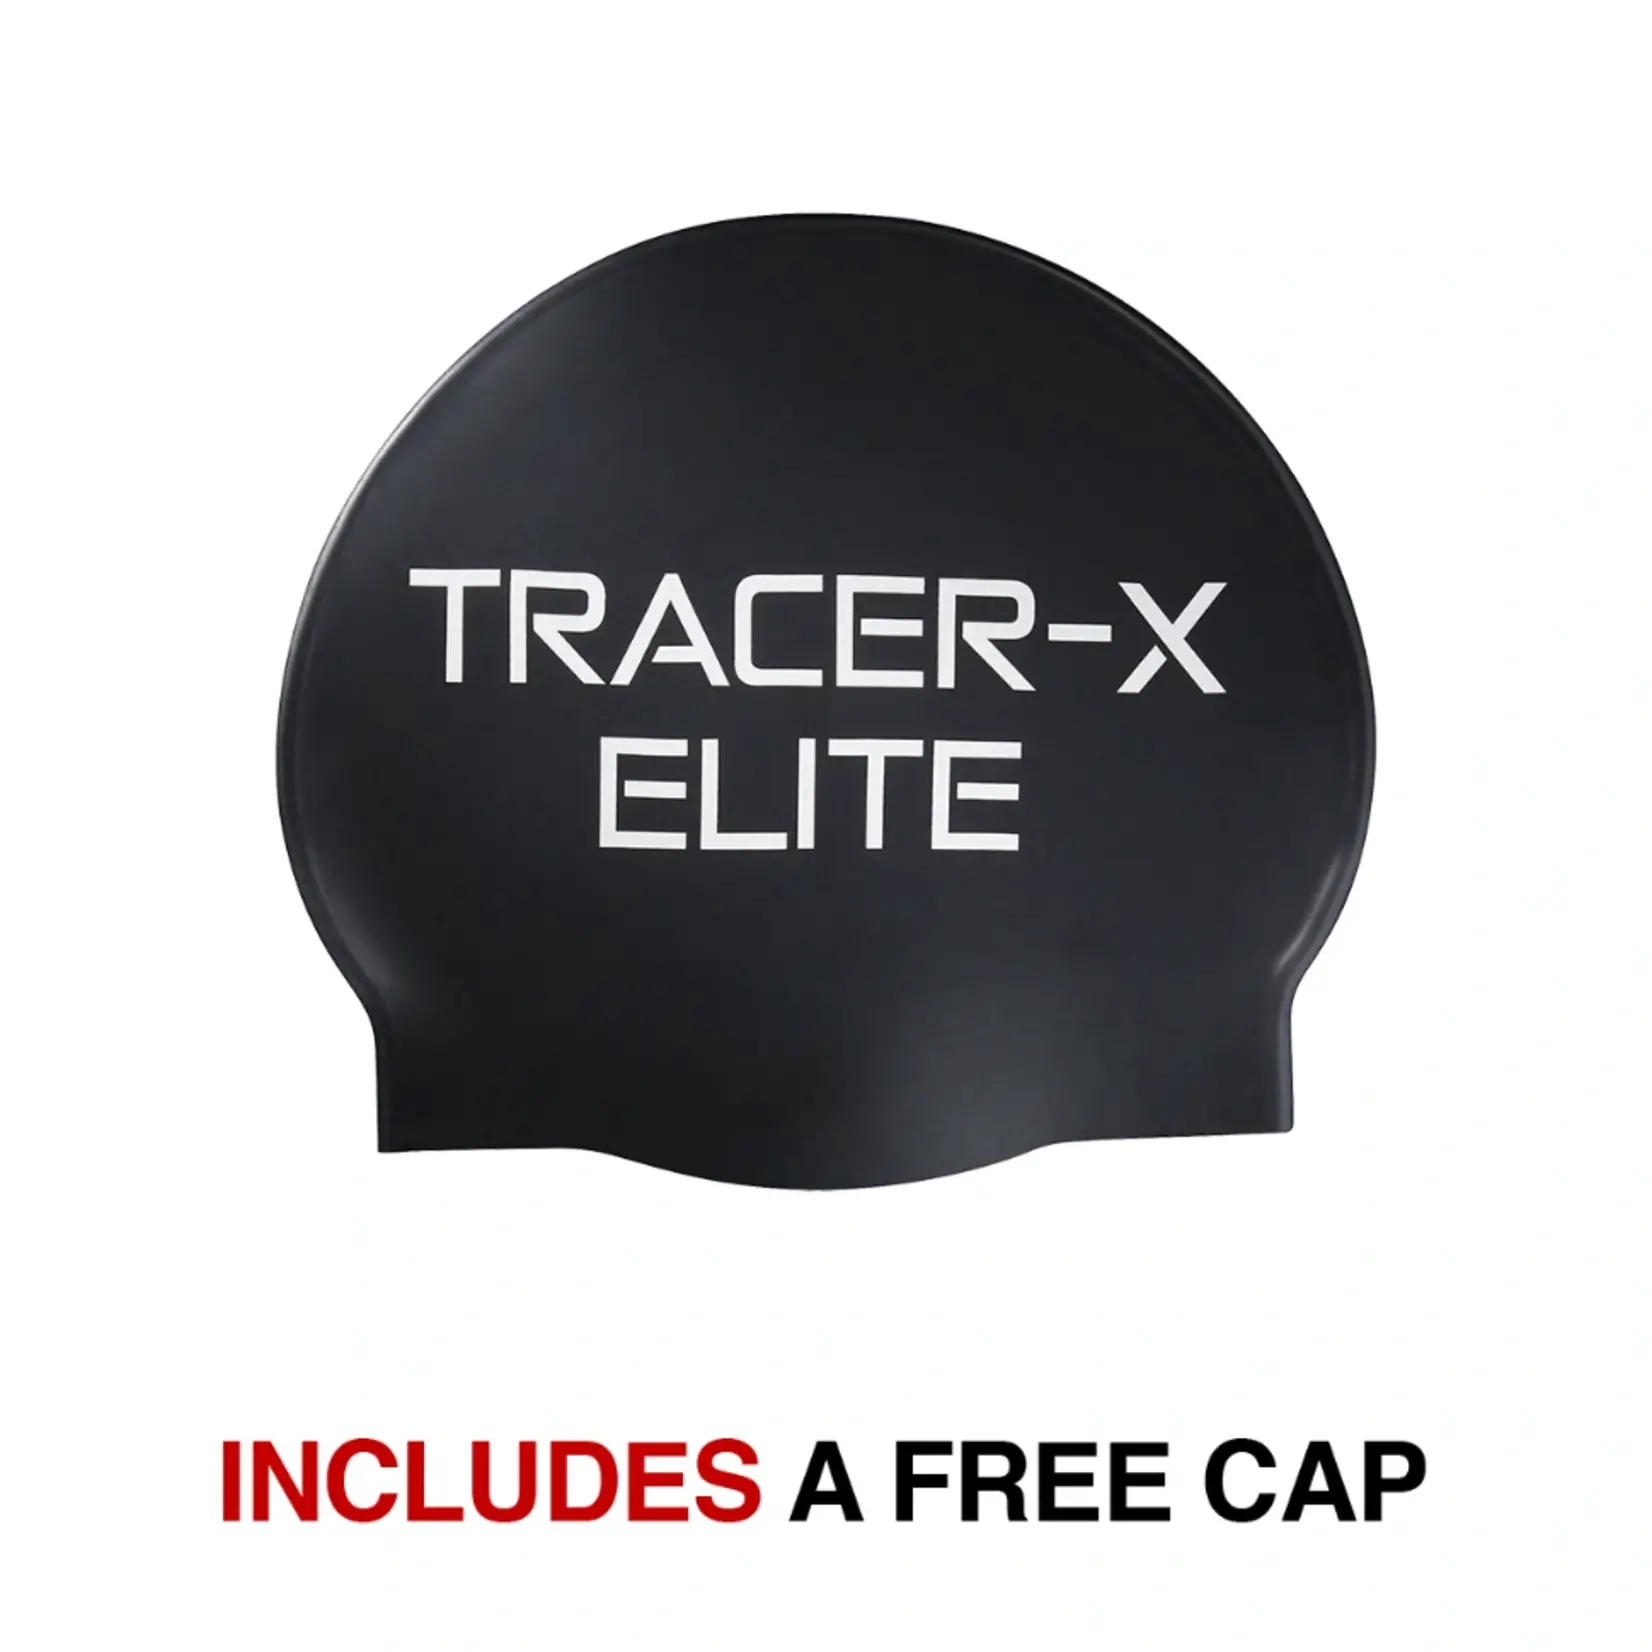 TYR TYR ADULT TRACER-X ELITE RACING GOGGLES